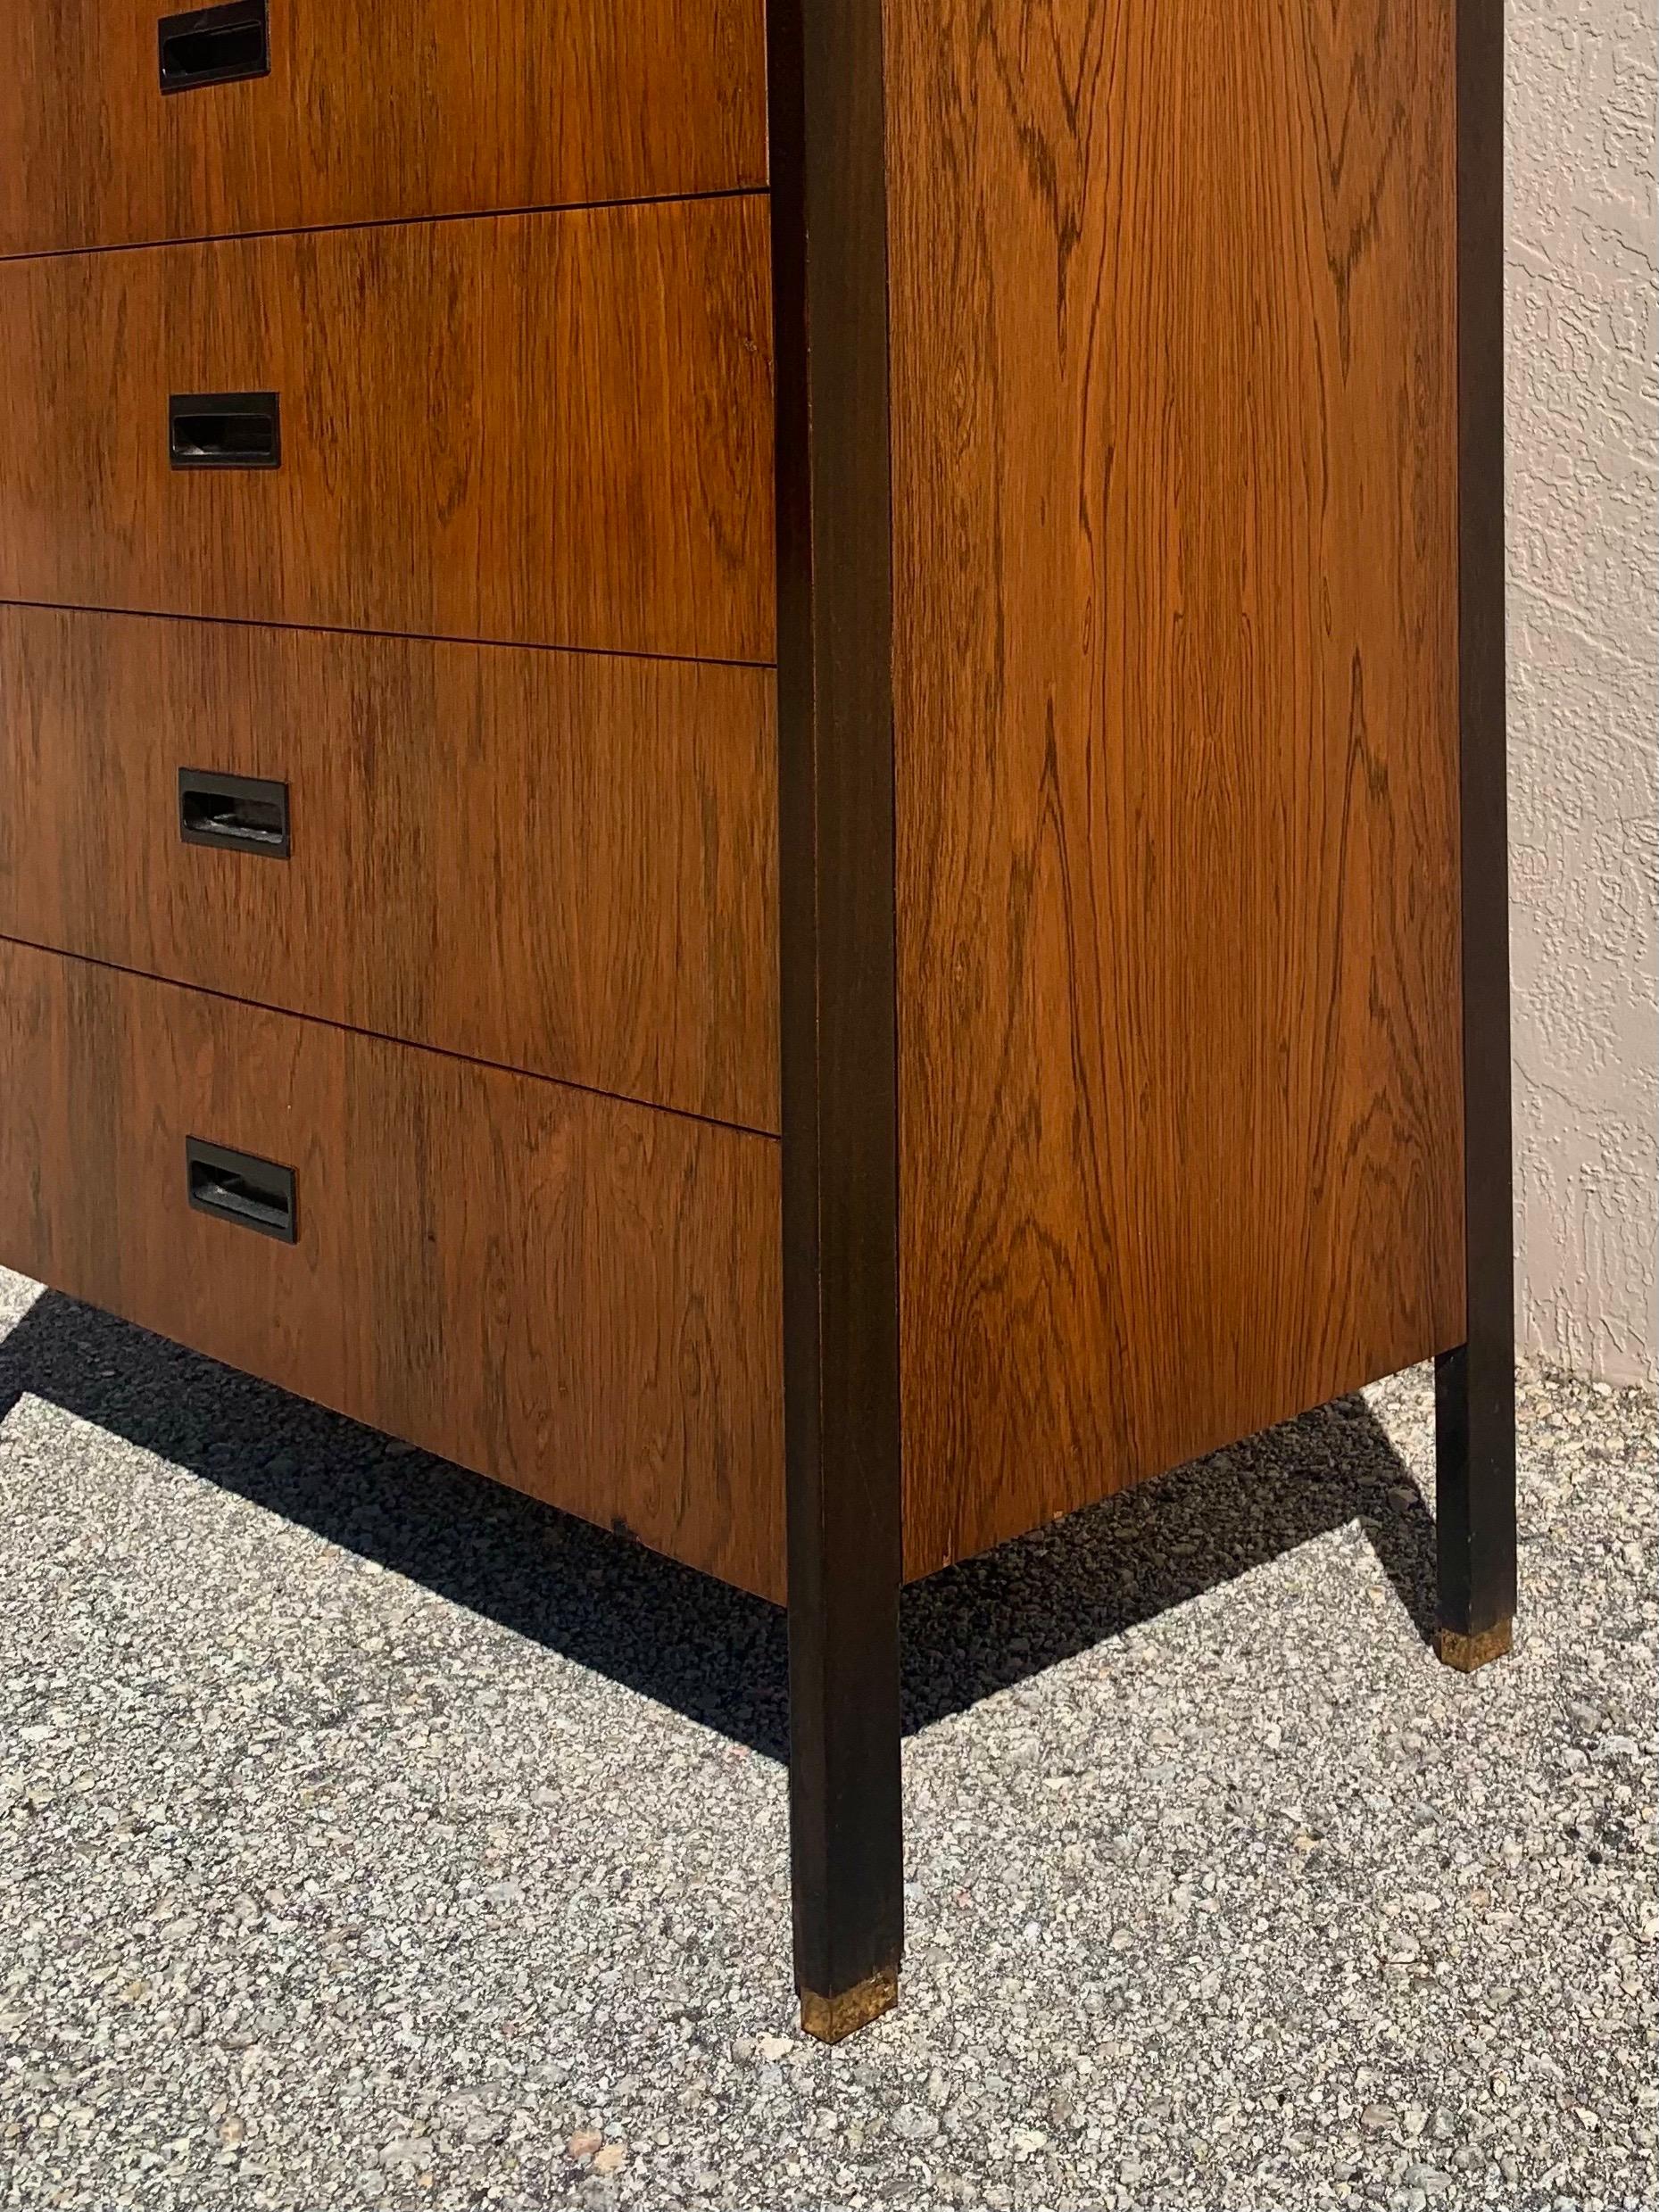 20th Century Harvey Probber Tall Boy 6 Drawer Dresser in Rosewood and Mahogany